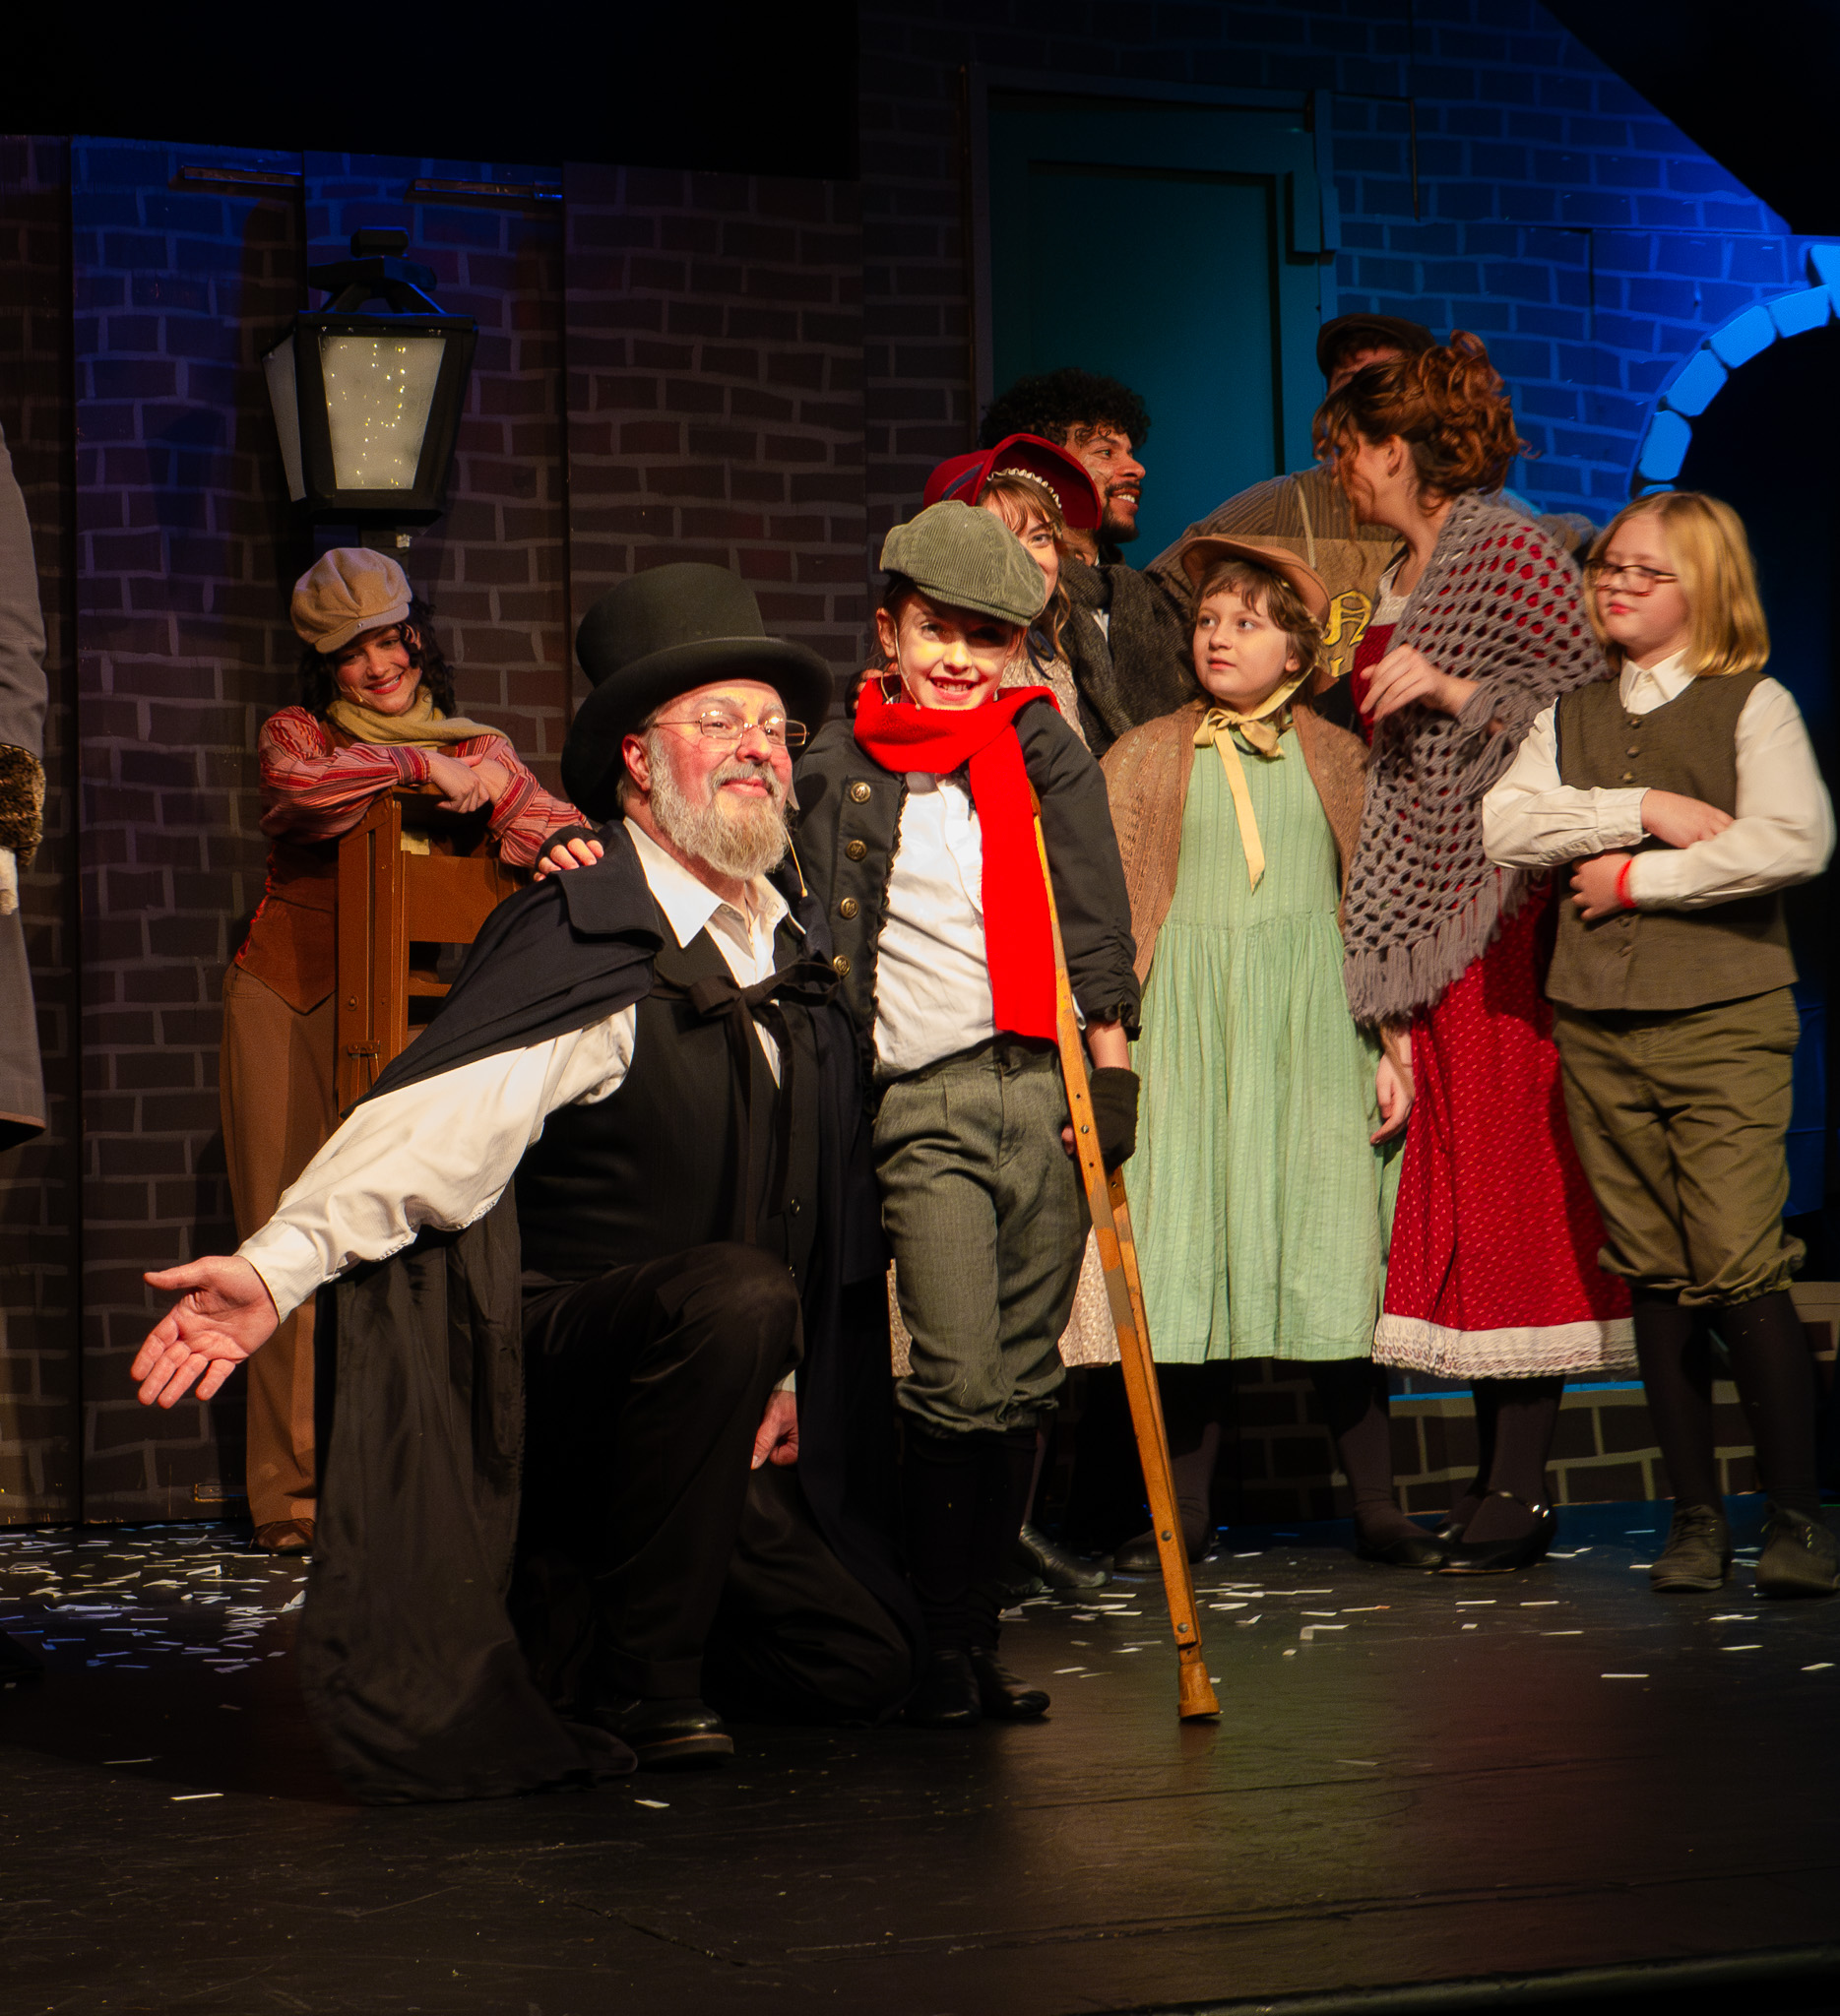 L to R: Darrell Meek as Scrooge, Abby C. as Tiny Tim 